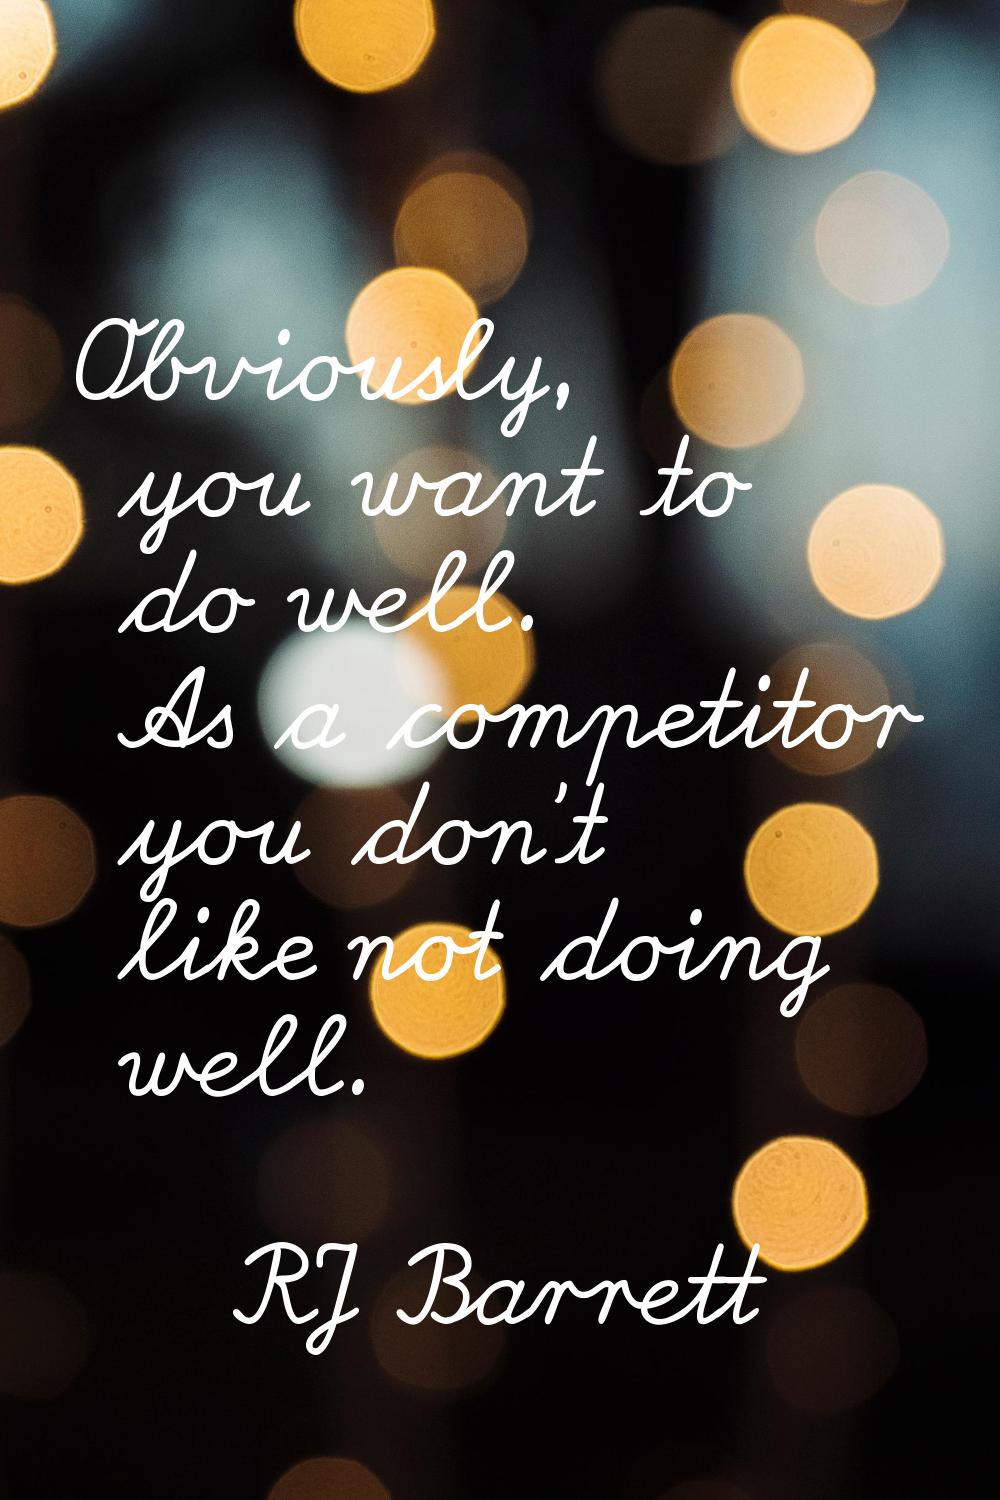 Obviously, you want to do well. As a competitor you don't like not doing well.